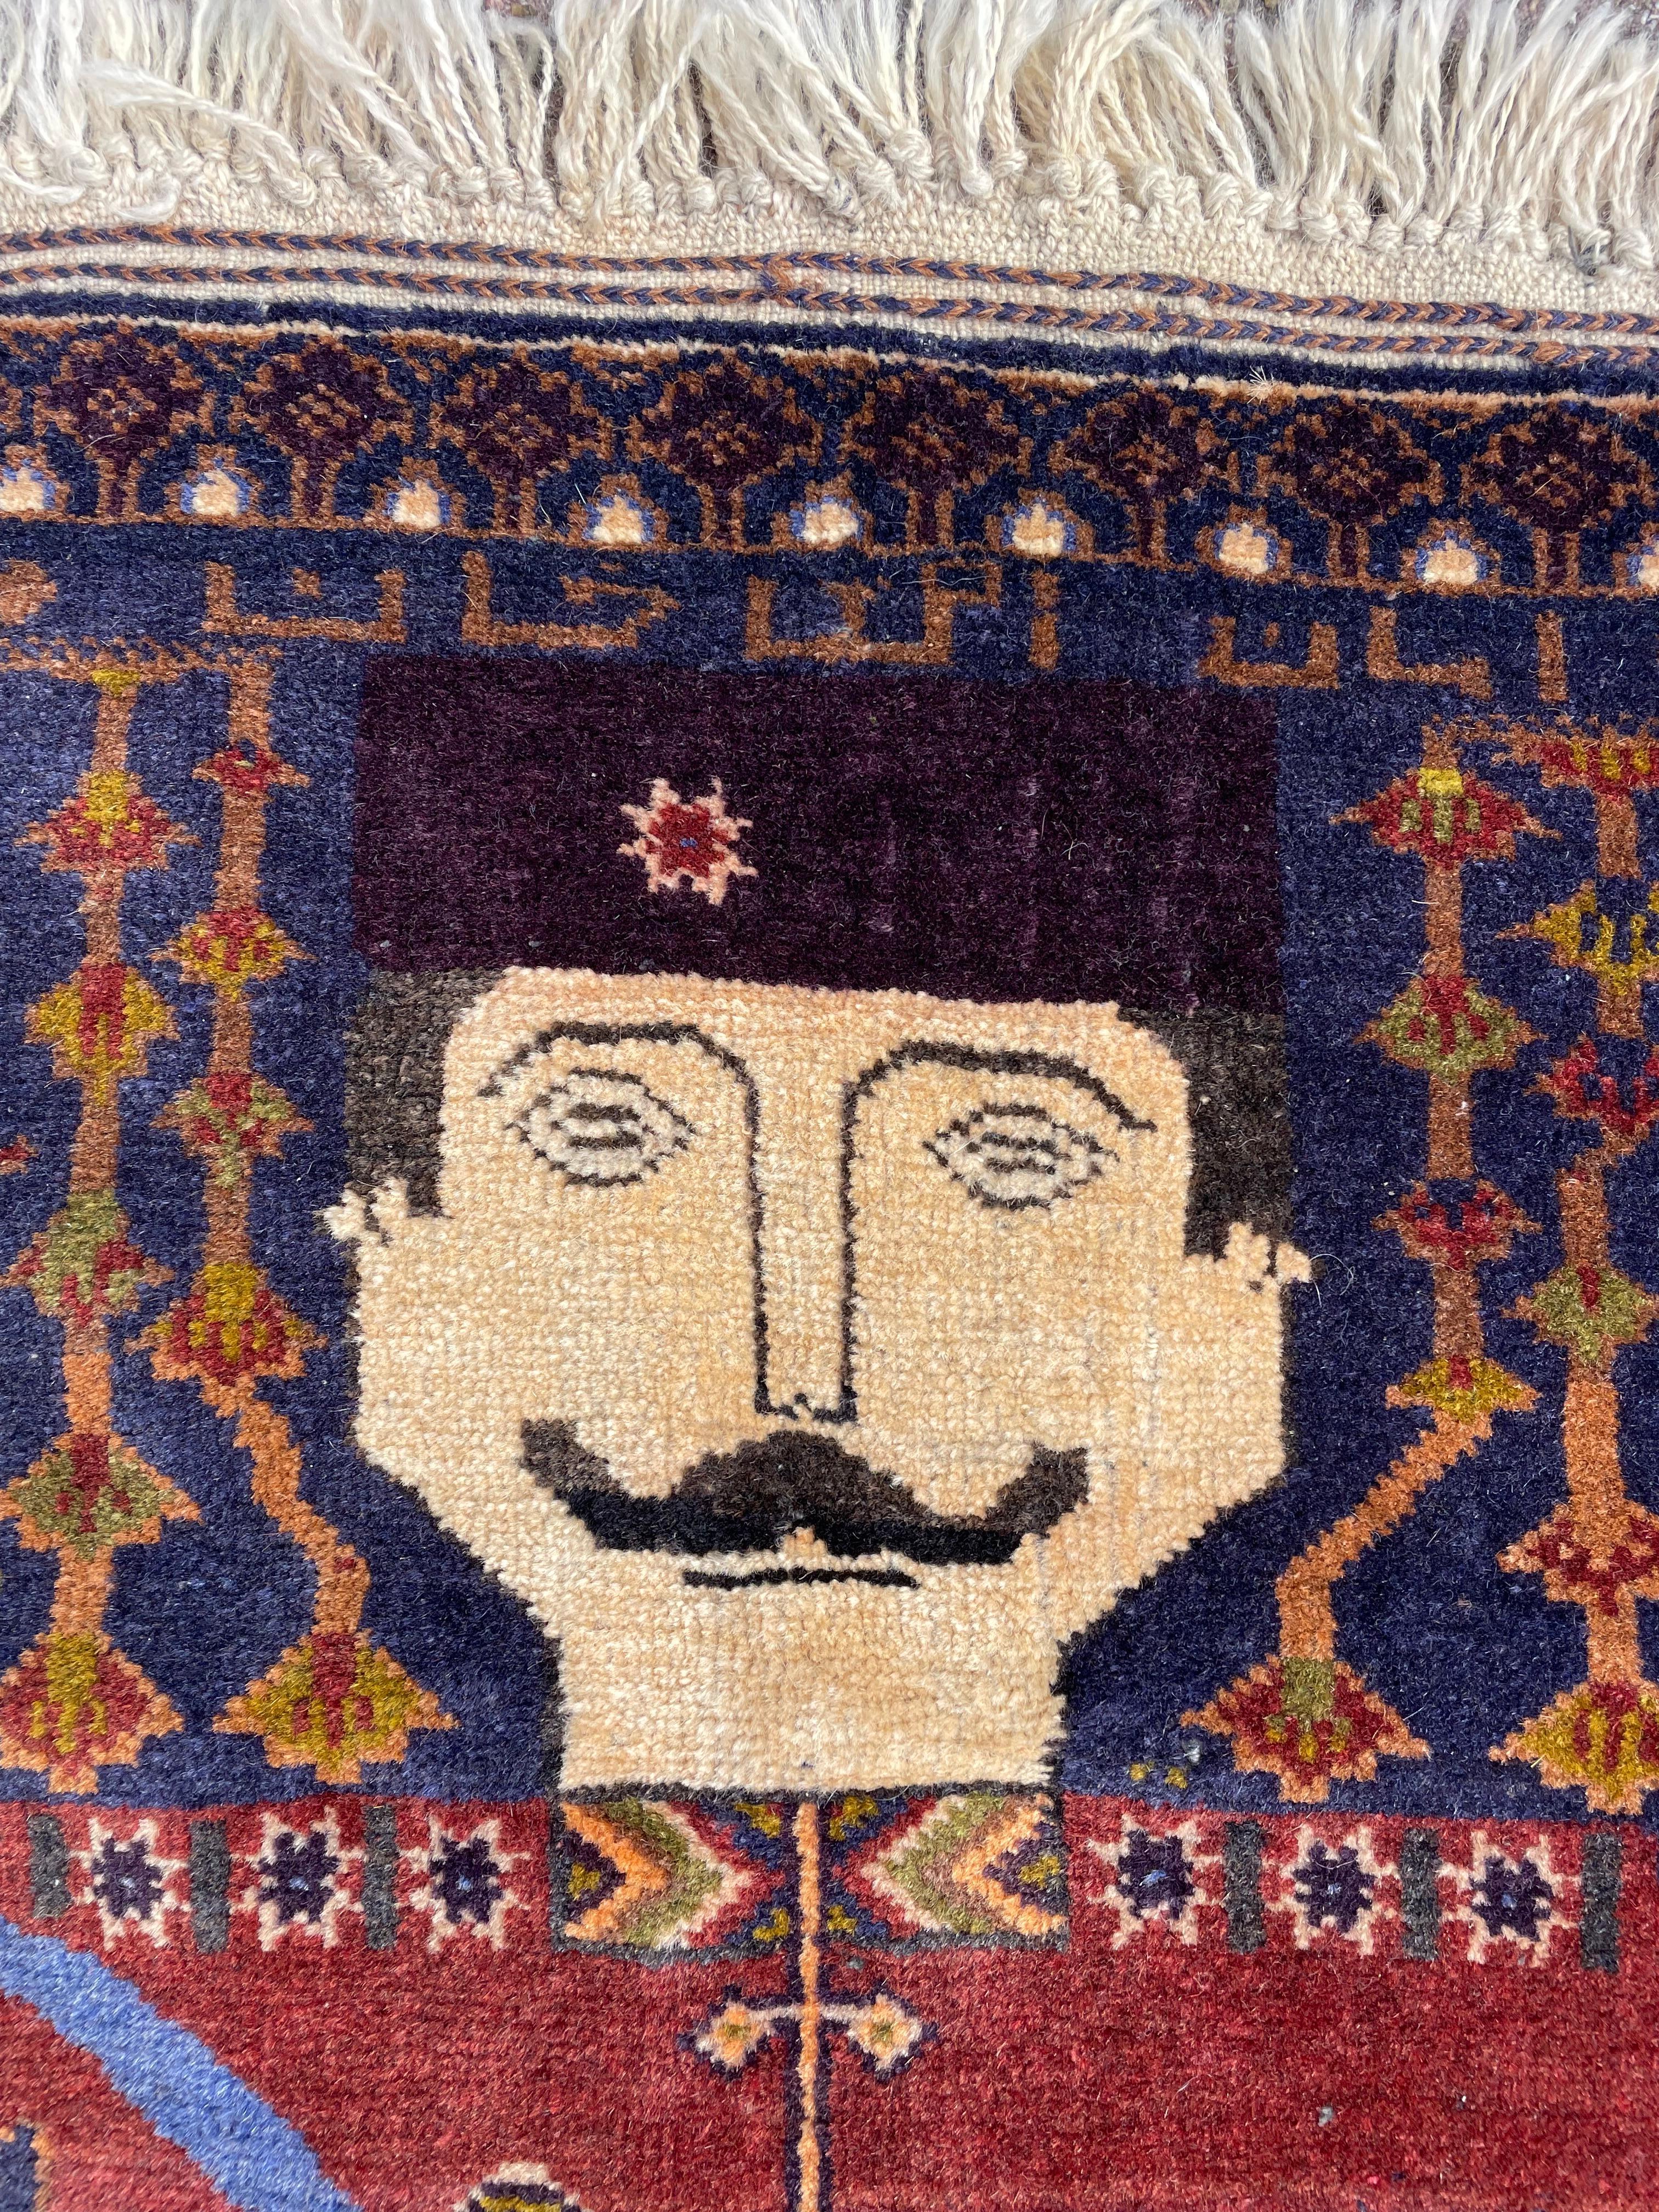 Rare Hand-Knotted War Rug Depicting Reign & King Amanullah Khan 1919 Afghanistan For Sale 5